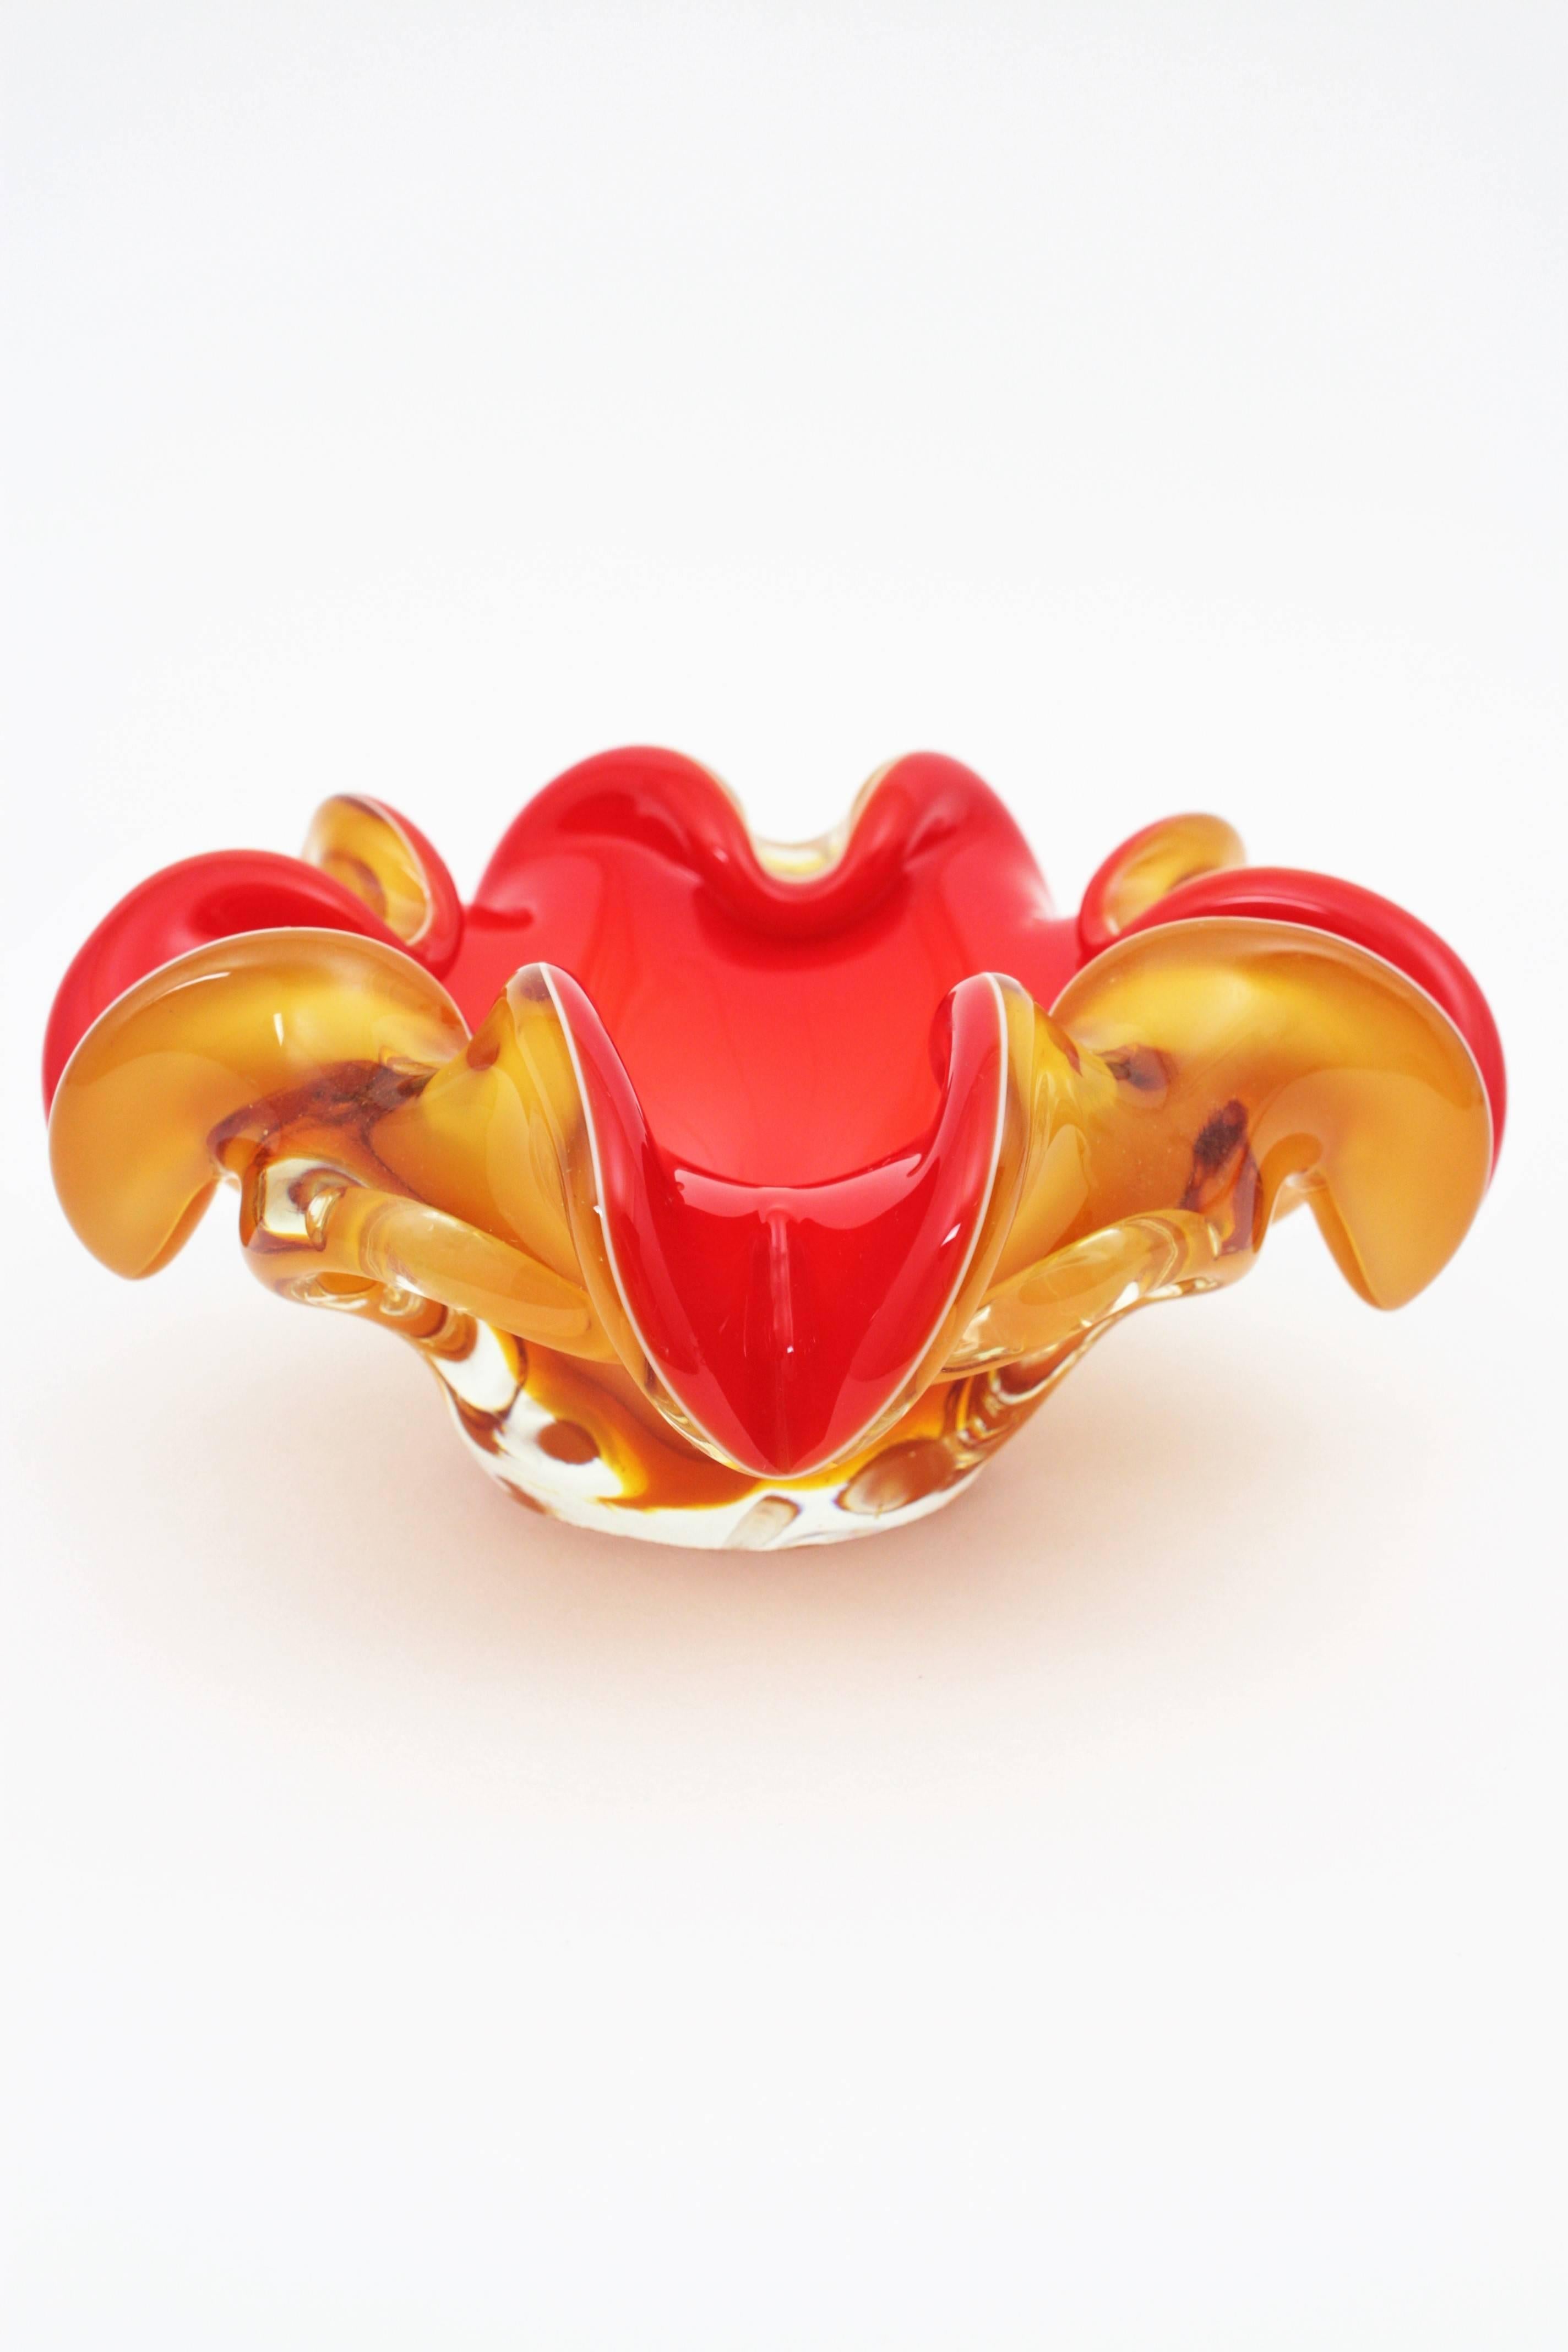 Amazing handblown Murano glass artistic flower shaped bowl or ashtray in vibrant colors. Red glass and white glass case into clear amber glass, highly decorative shapes and spectacular piece to combine with other Murano glass pieces or to use it